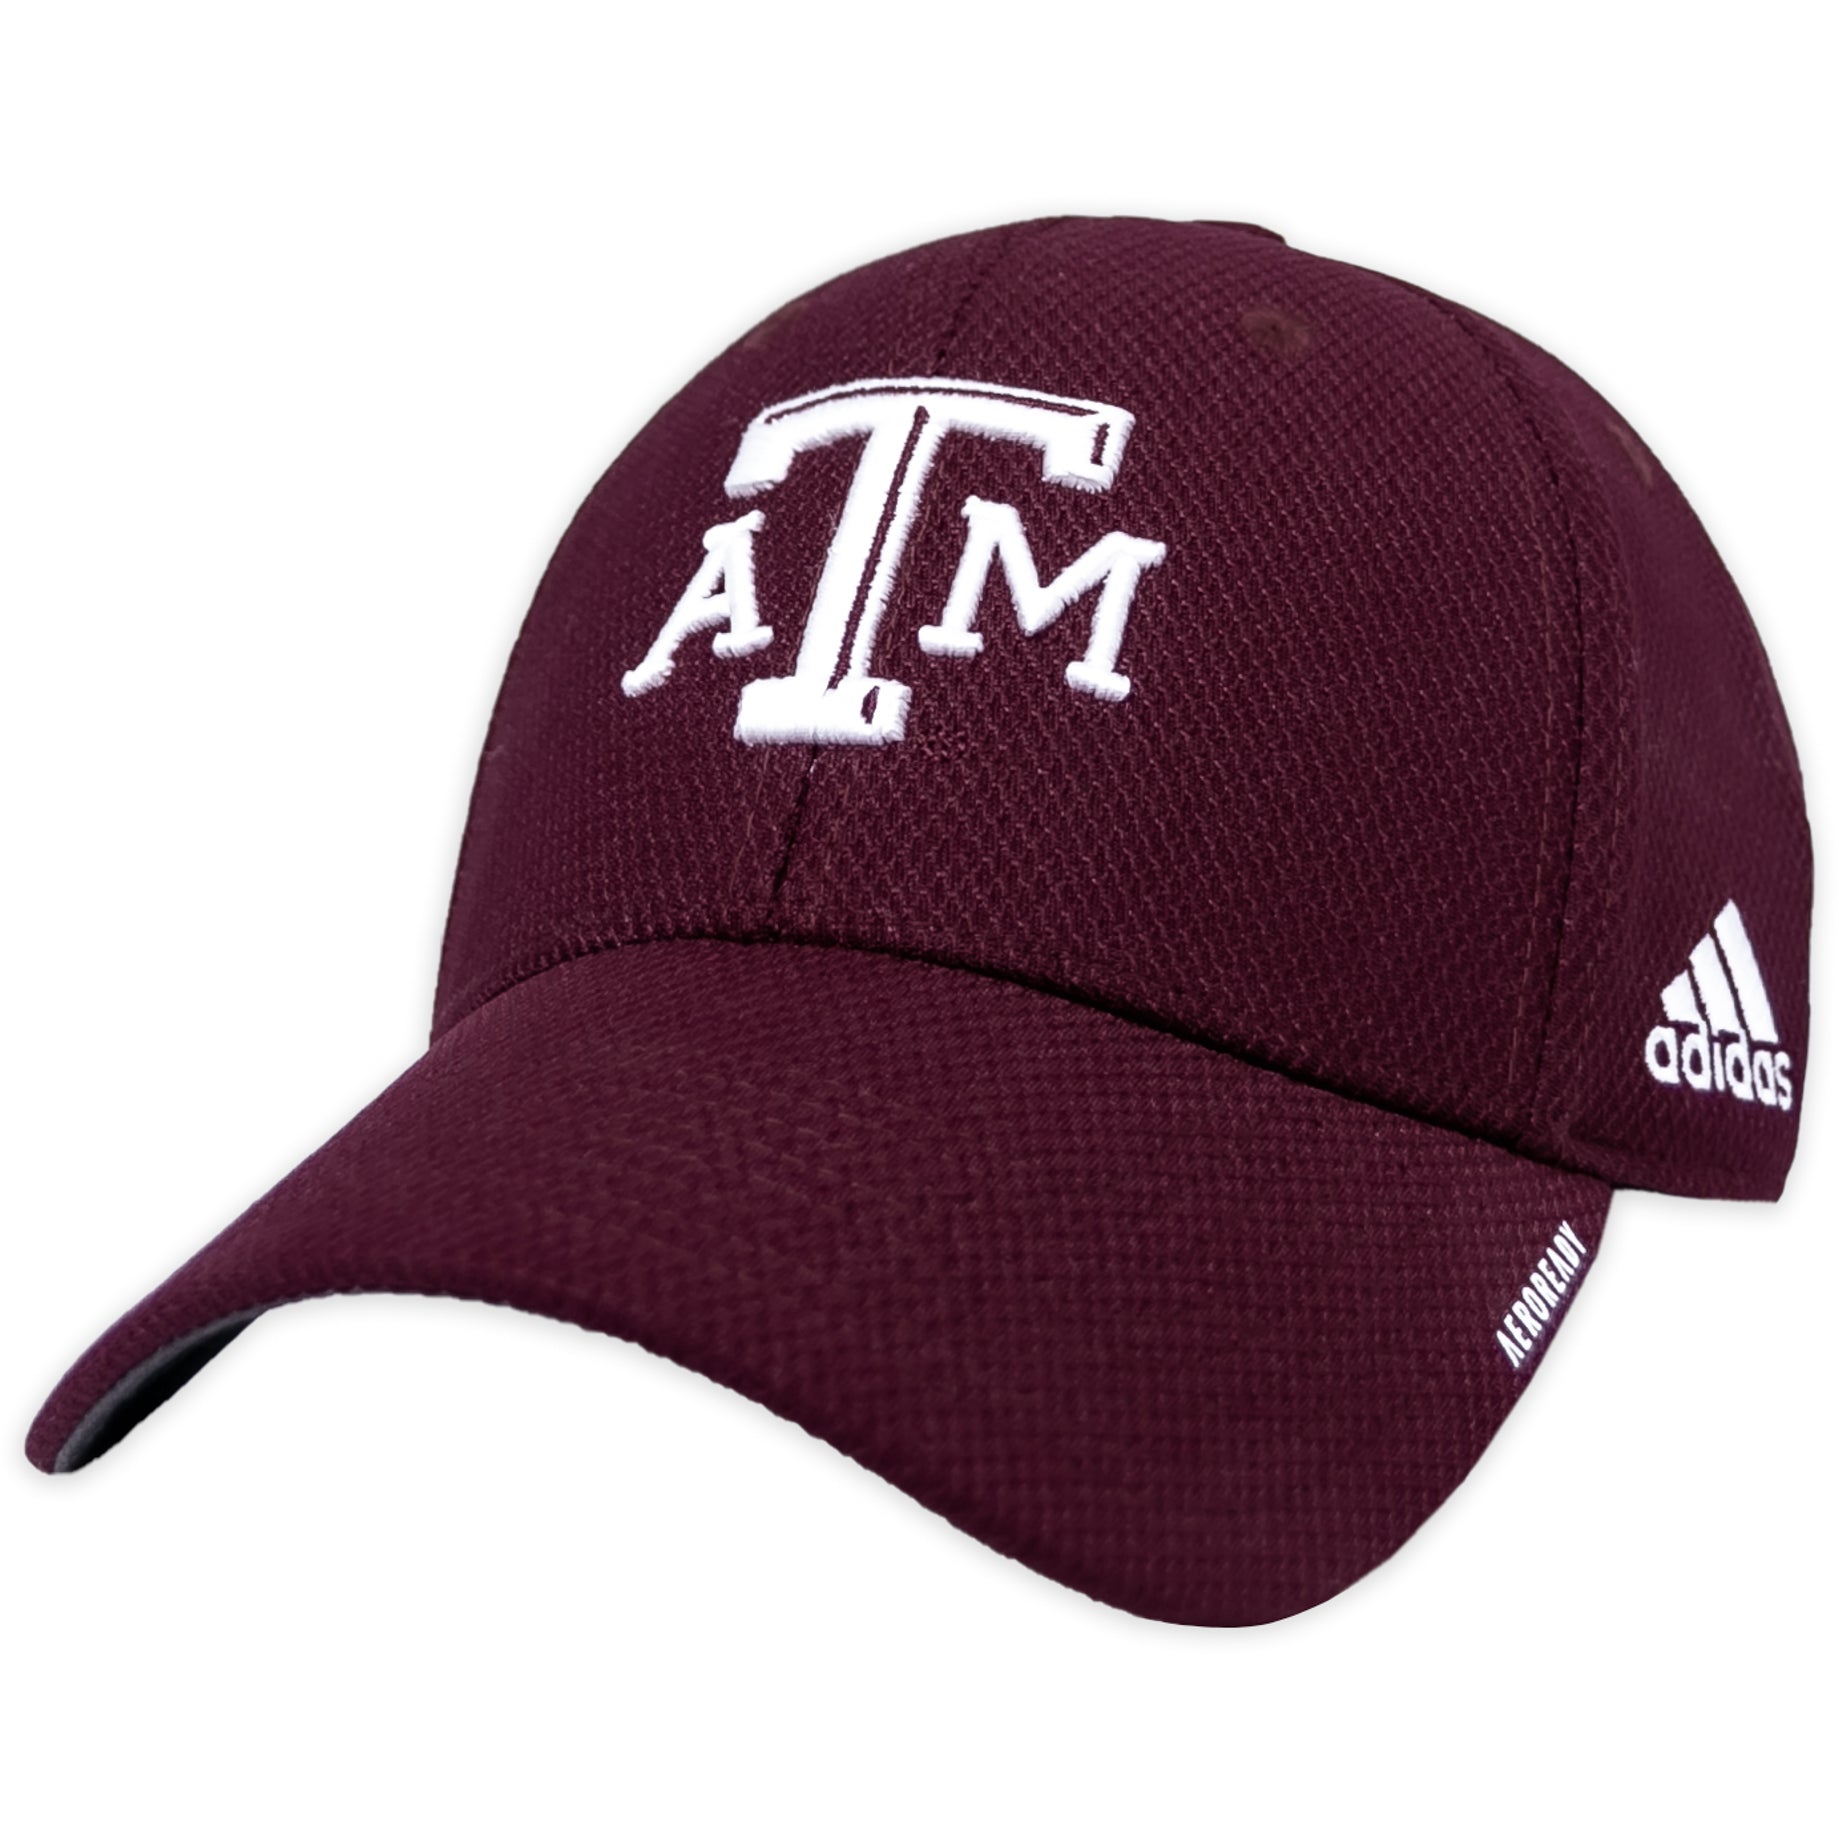 Onzuiver Basistheorie Pedagogie Texas A&M Adidas Coaches Structured Flex Fitted Hat